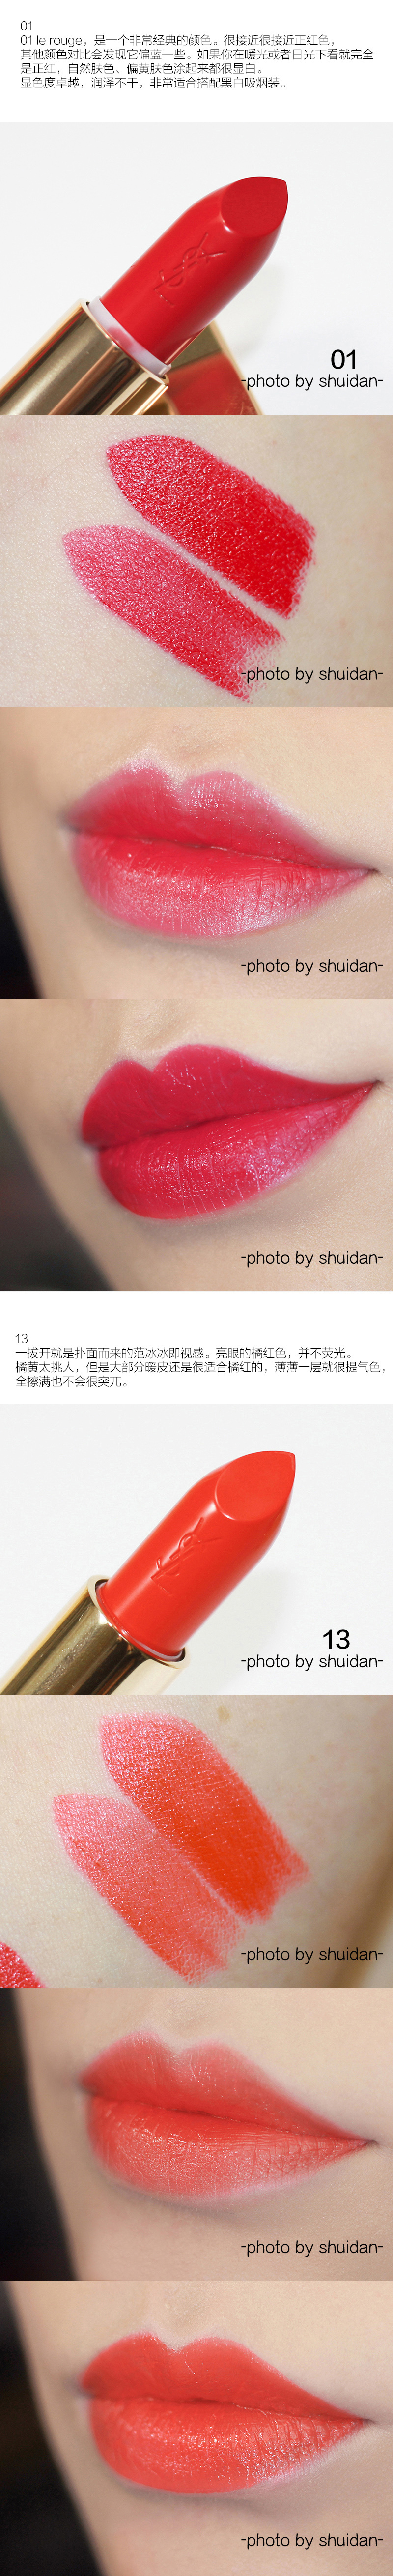 YSL圣罗兰 ROUGE PUR COUTURE 01、13、17、19、36、49、205、208试色